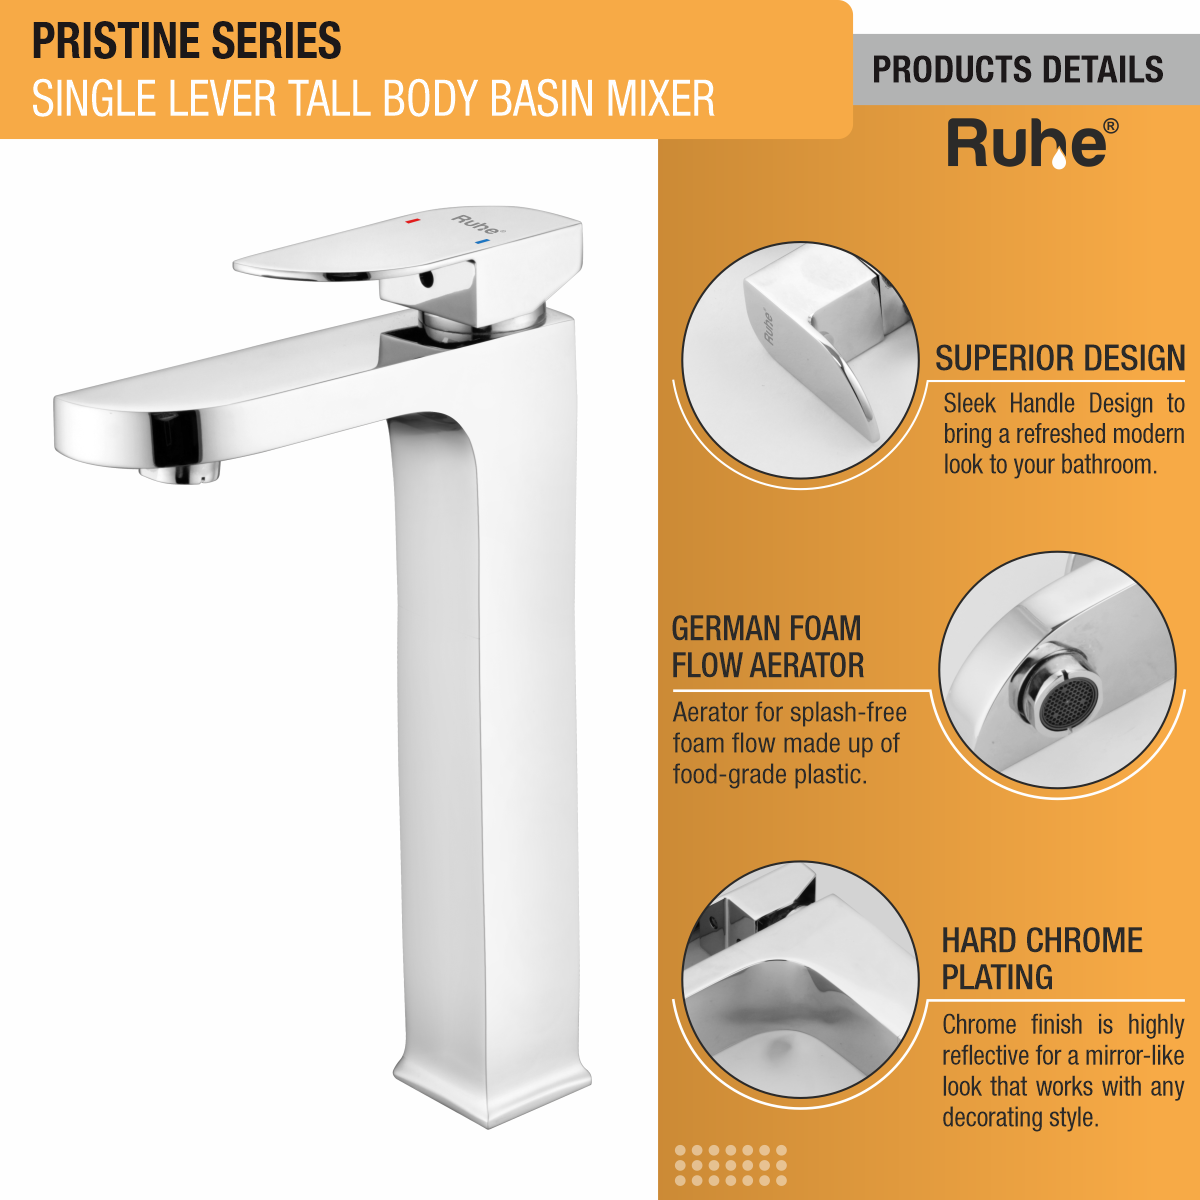 Pristine Single Lever Tall Body Basin Mixer Faucet product details